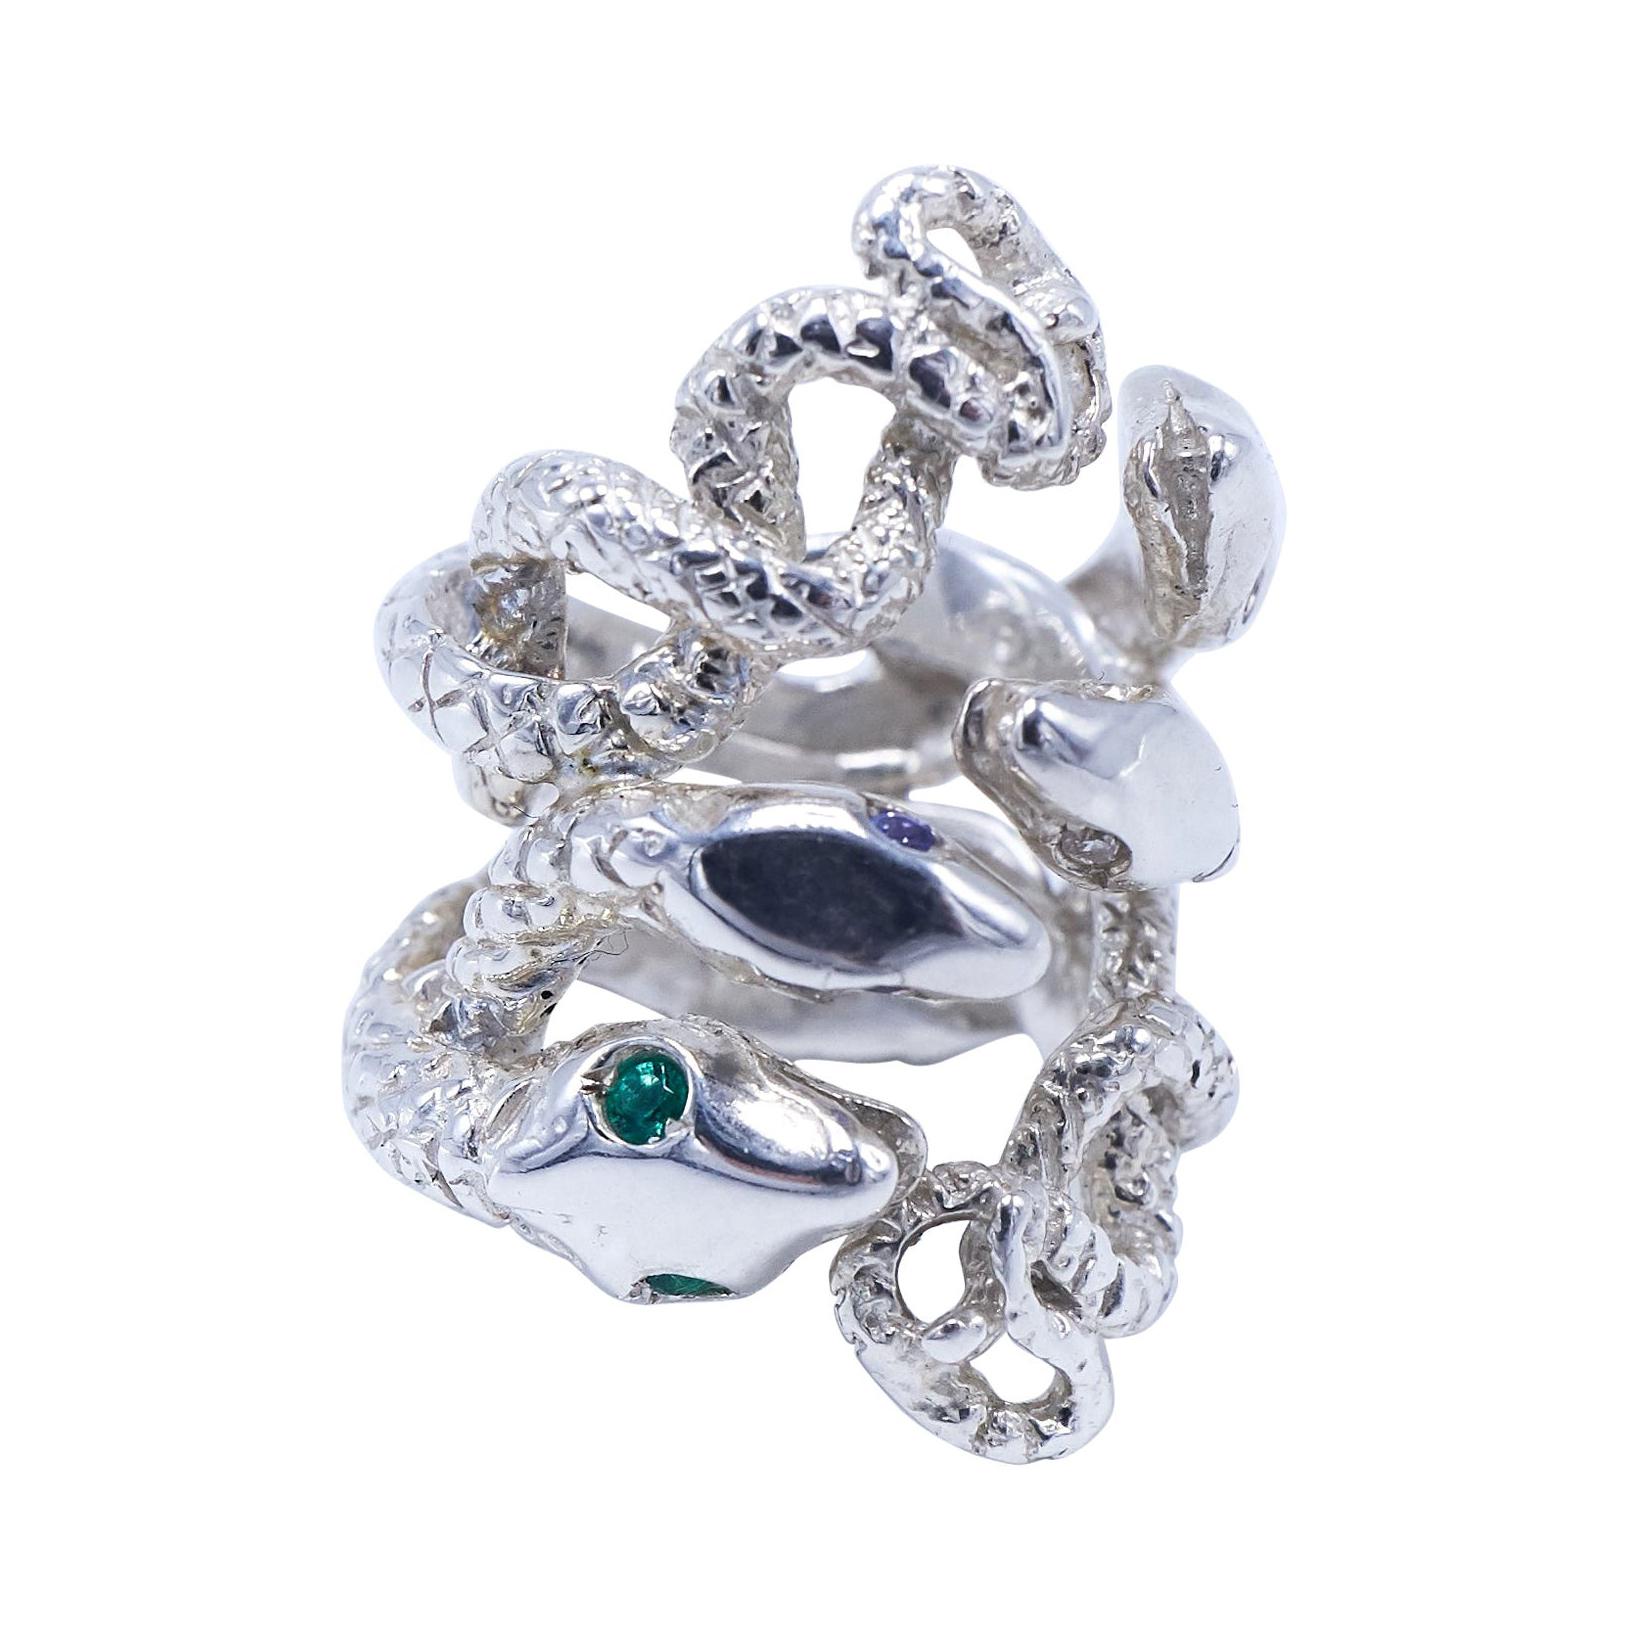  Emerald White Diamond Cocktail Statement Snake Silver Ring J Dauphin For Sale